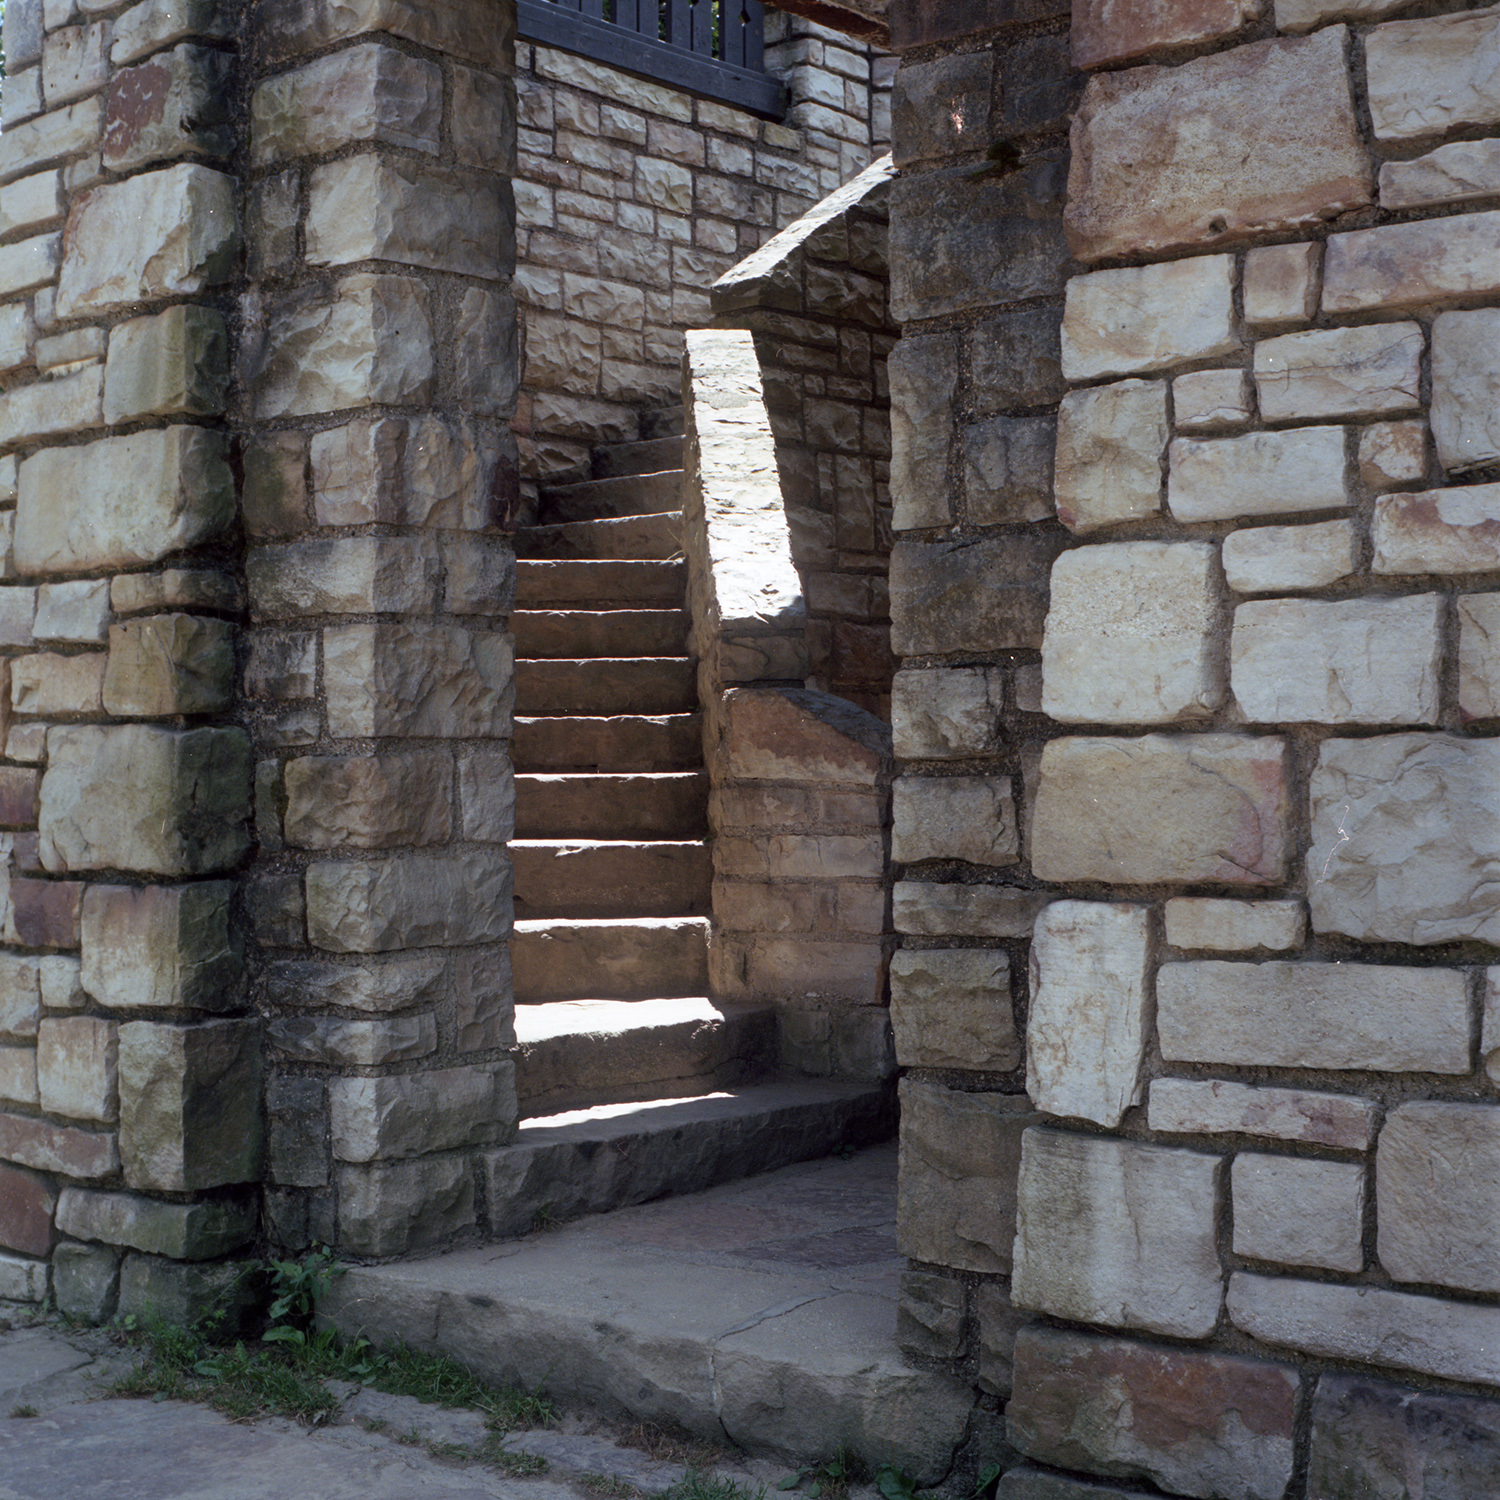  Stone Tower Allegany State Park (NY) 6x6 Color film 